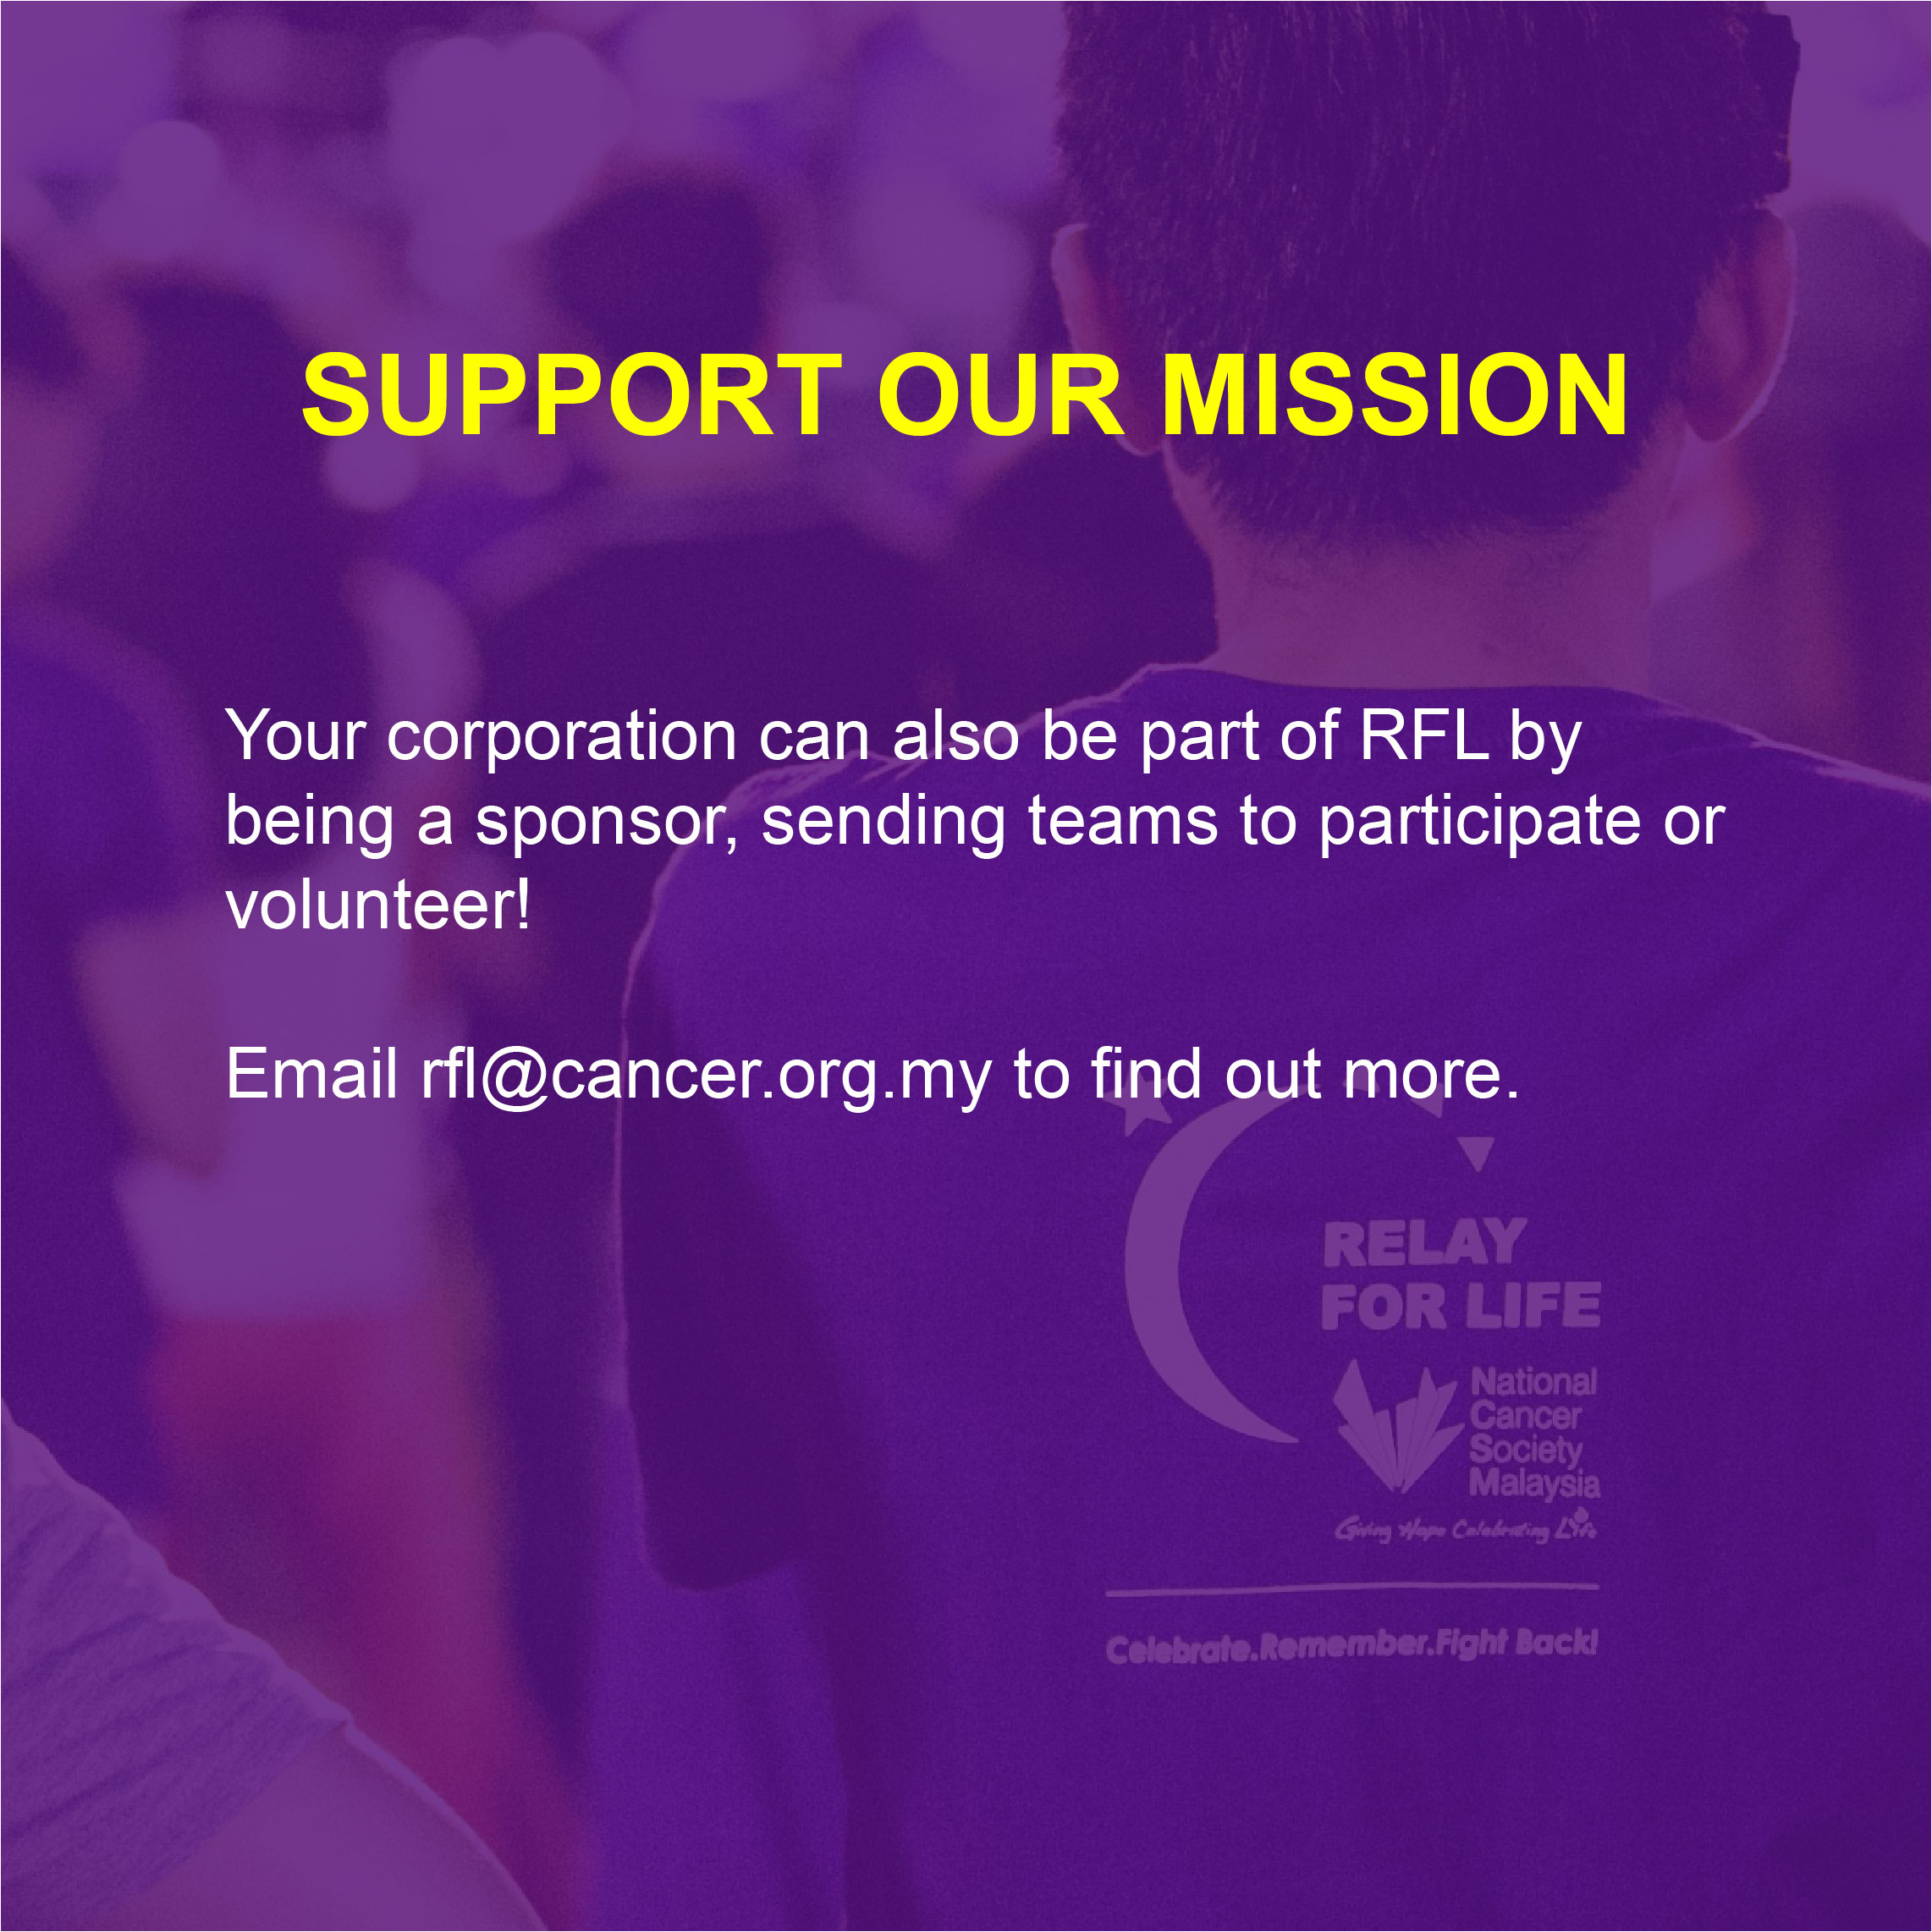 585370 ratoz relay for life email templates